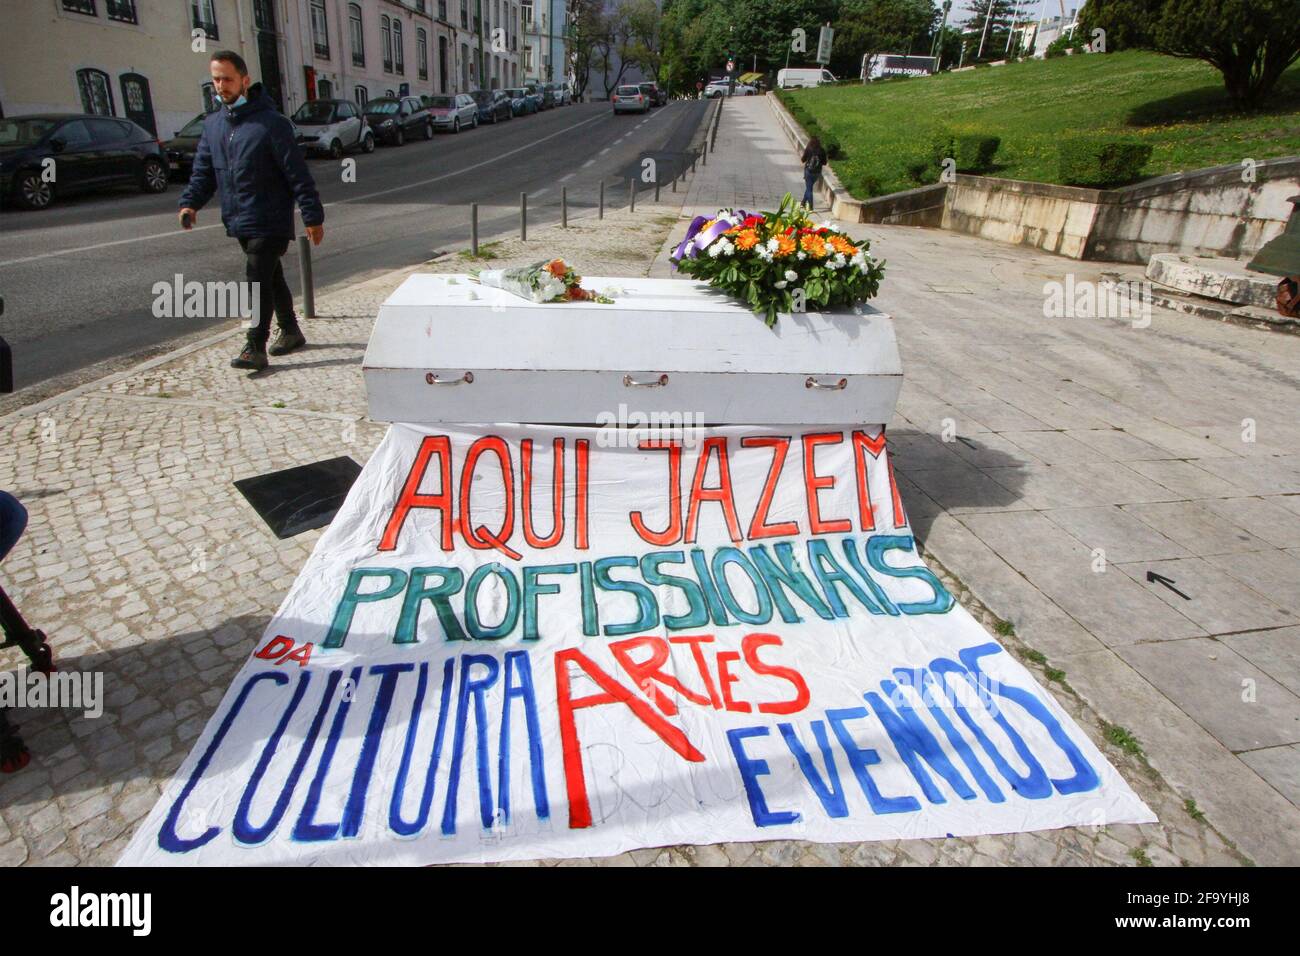 Lisbon, Portugal. 21st Apr, 2021. A man walks near a coffin simulating a funeral ceremony outside the Republic Assembly Palace in Lisbon. The 'Vigília Cultura e Artes' group performs a street protest in order to keep vigil for all the professionals of the culture sector who have been left behind by the few emergency measures programmed by the Portuguese Government in the face of the COVID-19 pandemic. Credit: SOPA Images Limited/Alamy Live News Stock Photo